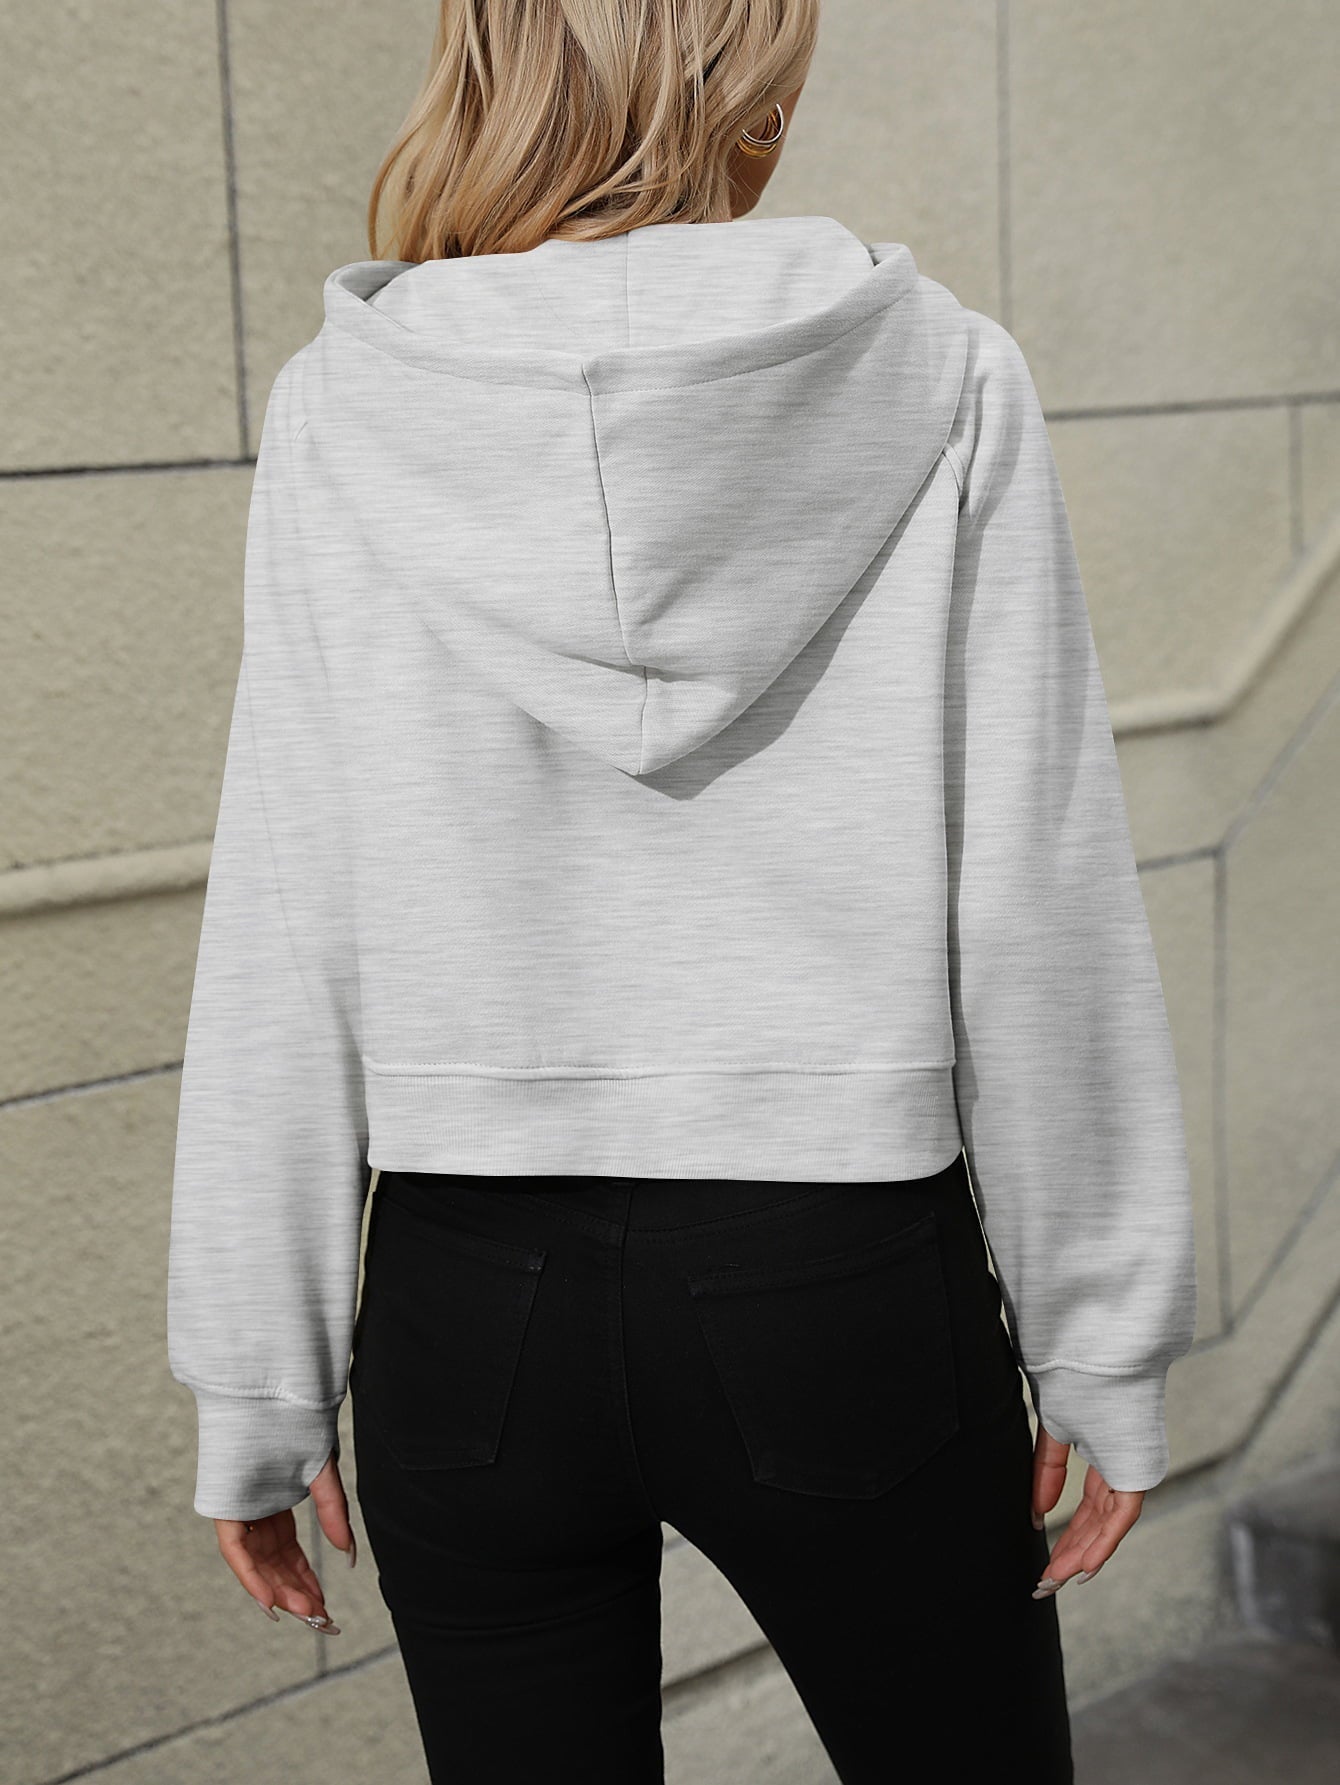 Raglan Sleeve Zip-Up Hoodie with Pocket Print on any thing USA/STOD clothes